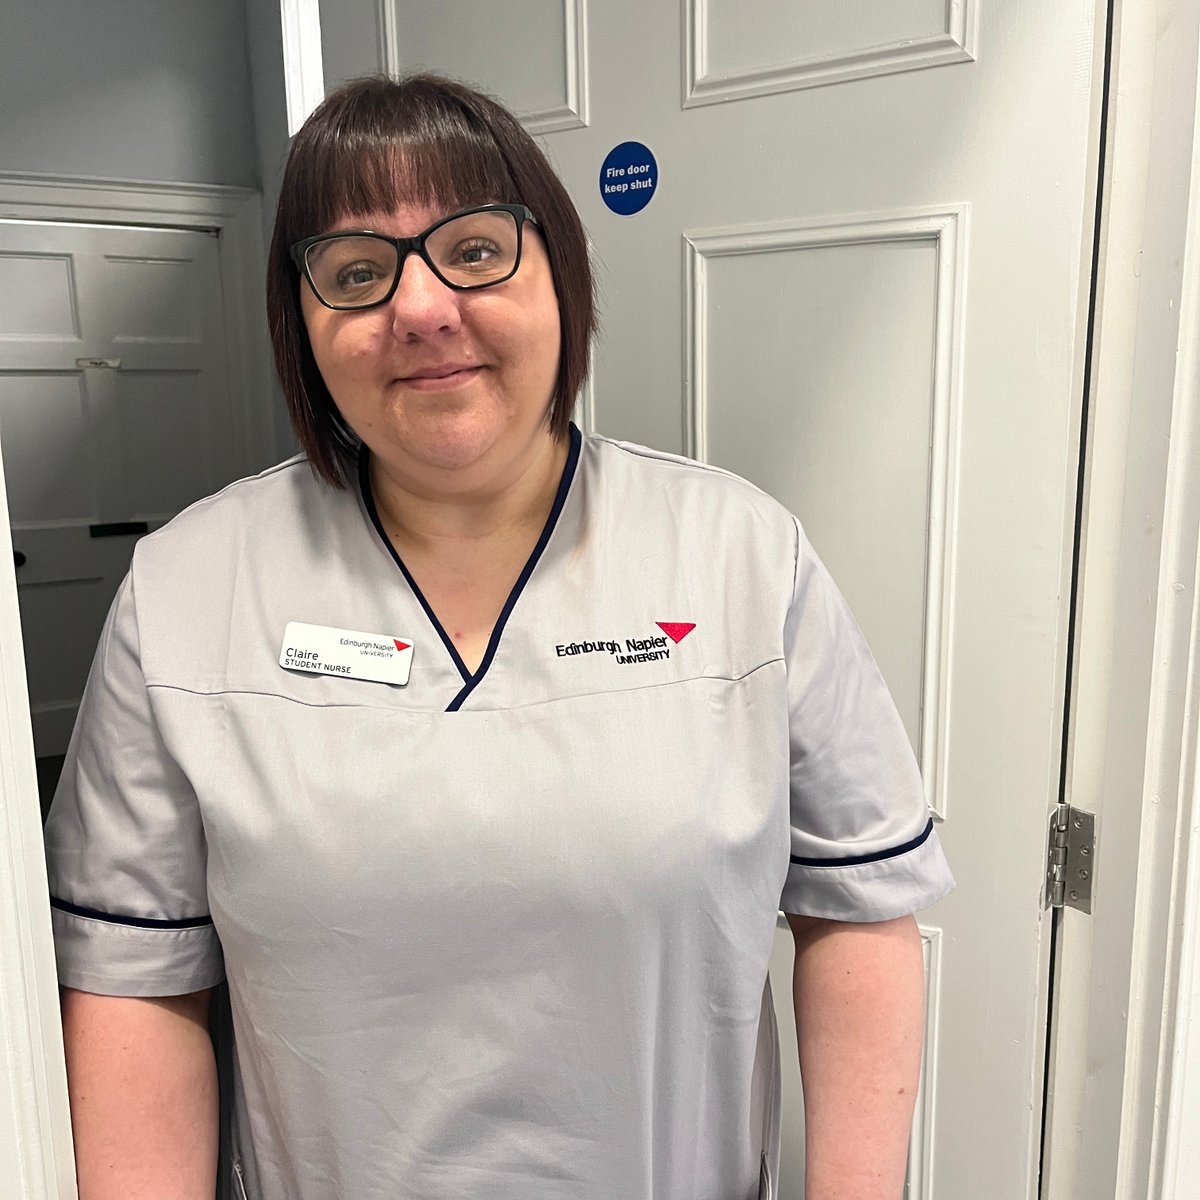 We're welcoming Claire who is on her first year nursing placement from @EdinburghNapier for five weeks 💚 Claire used to work here as a care assistant 9 years ago! 'I'm really lucky to get a placement here and I'm looking forward to meeting the guests. It's good to be back.'